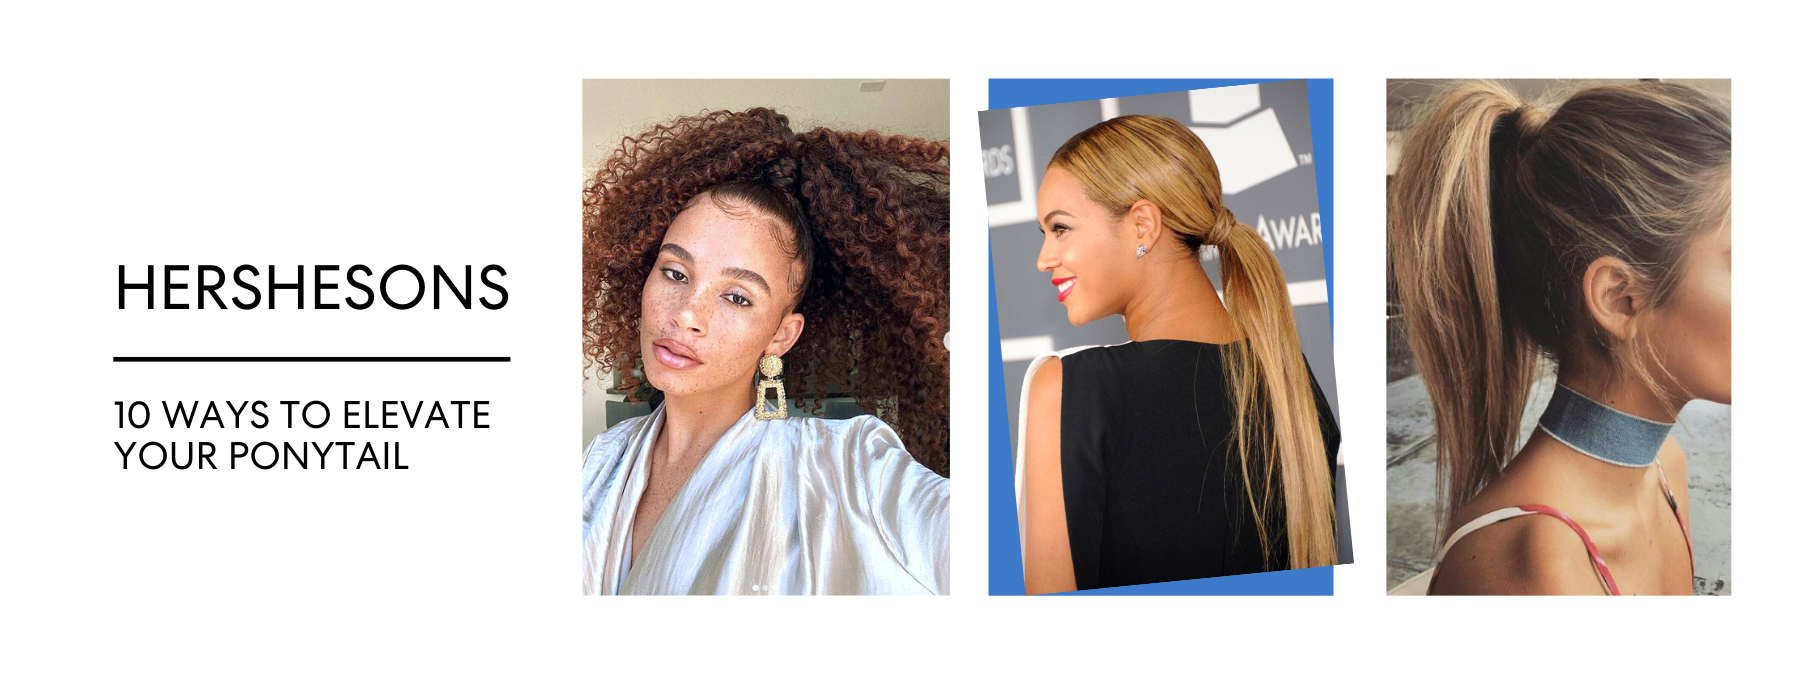 10 WAYS TO ELEVATE YOUR PONYTAIL